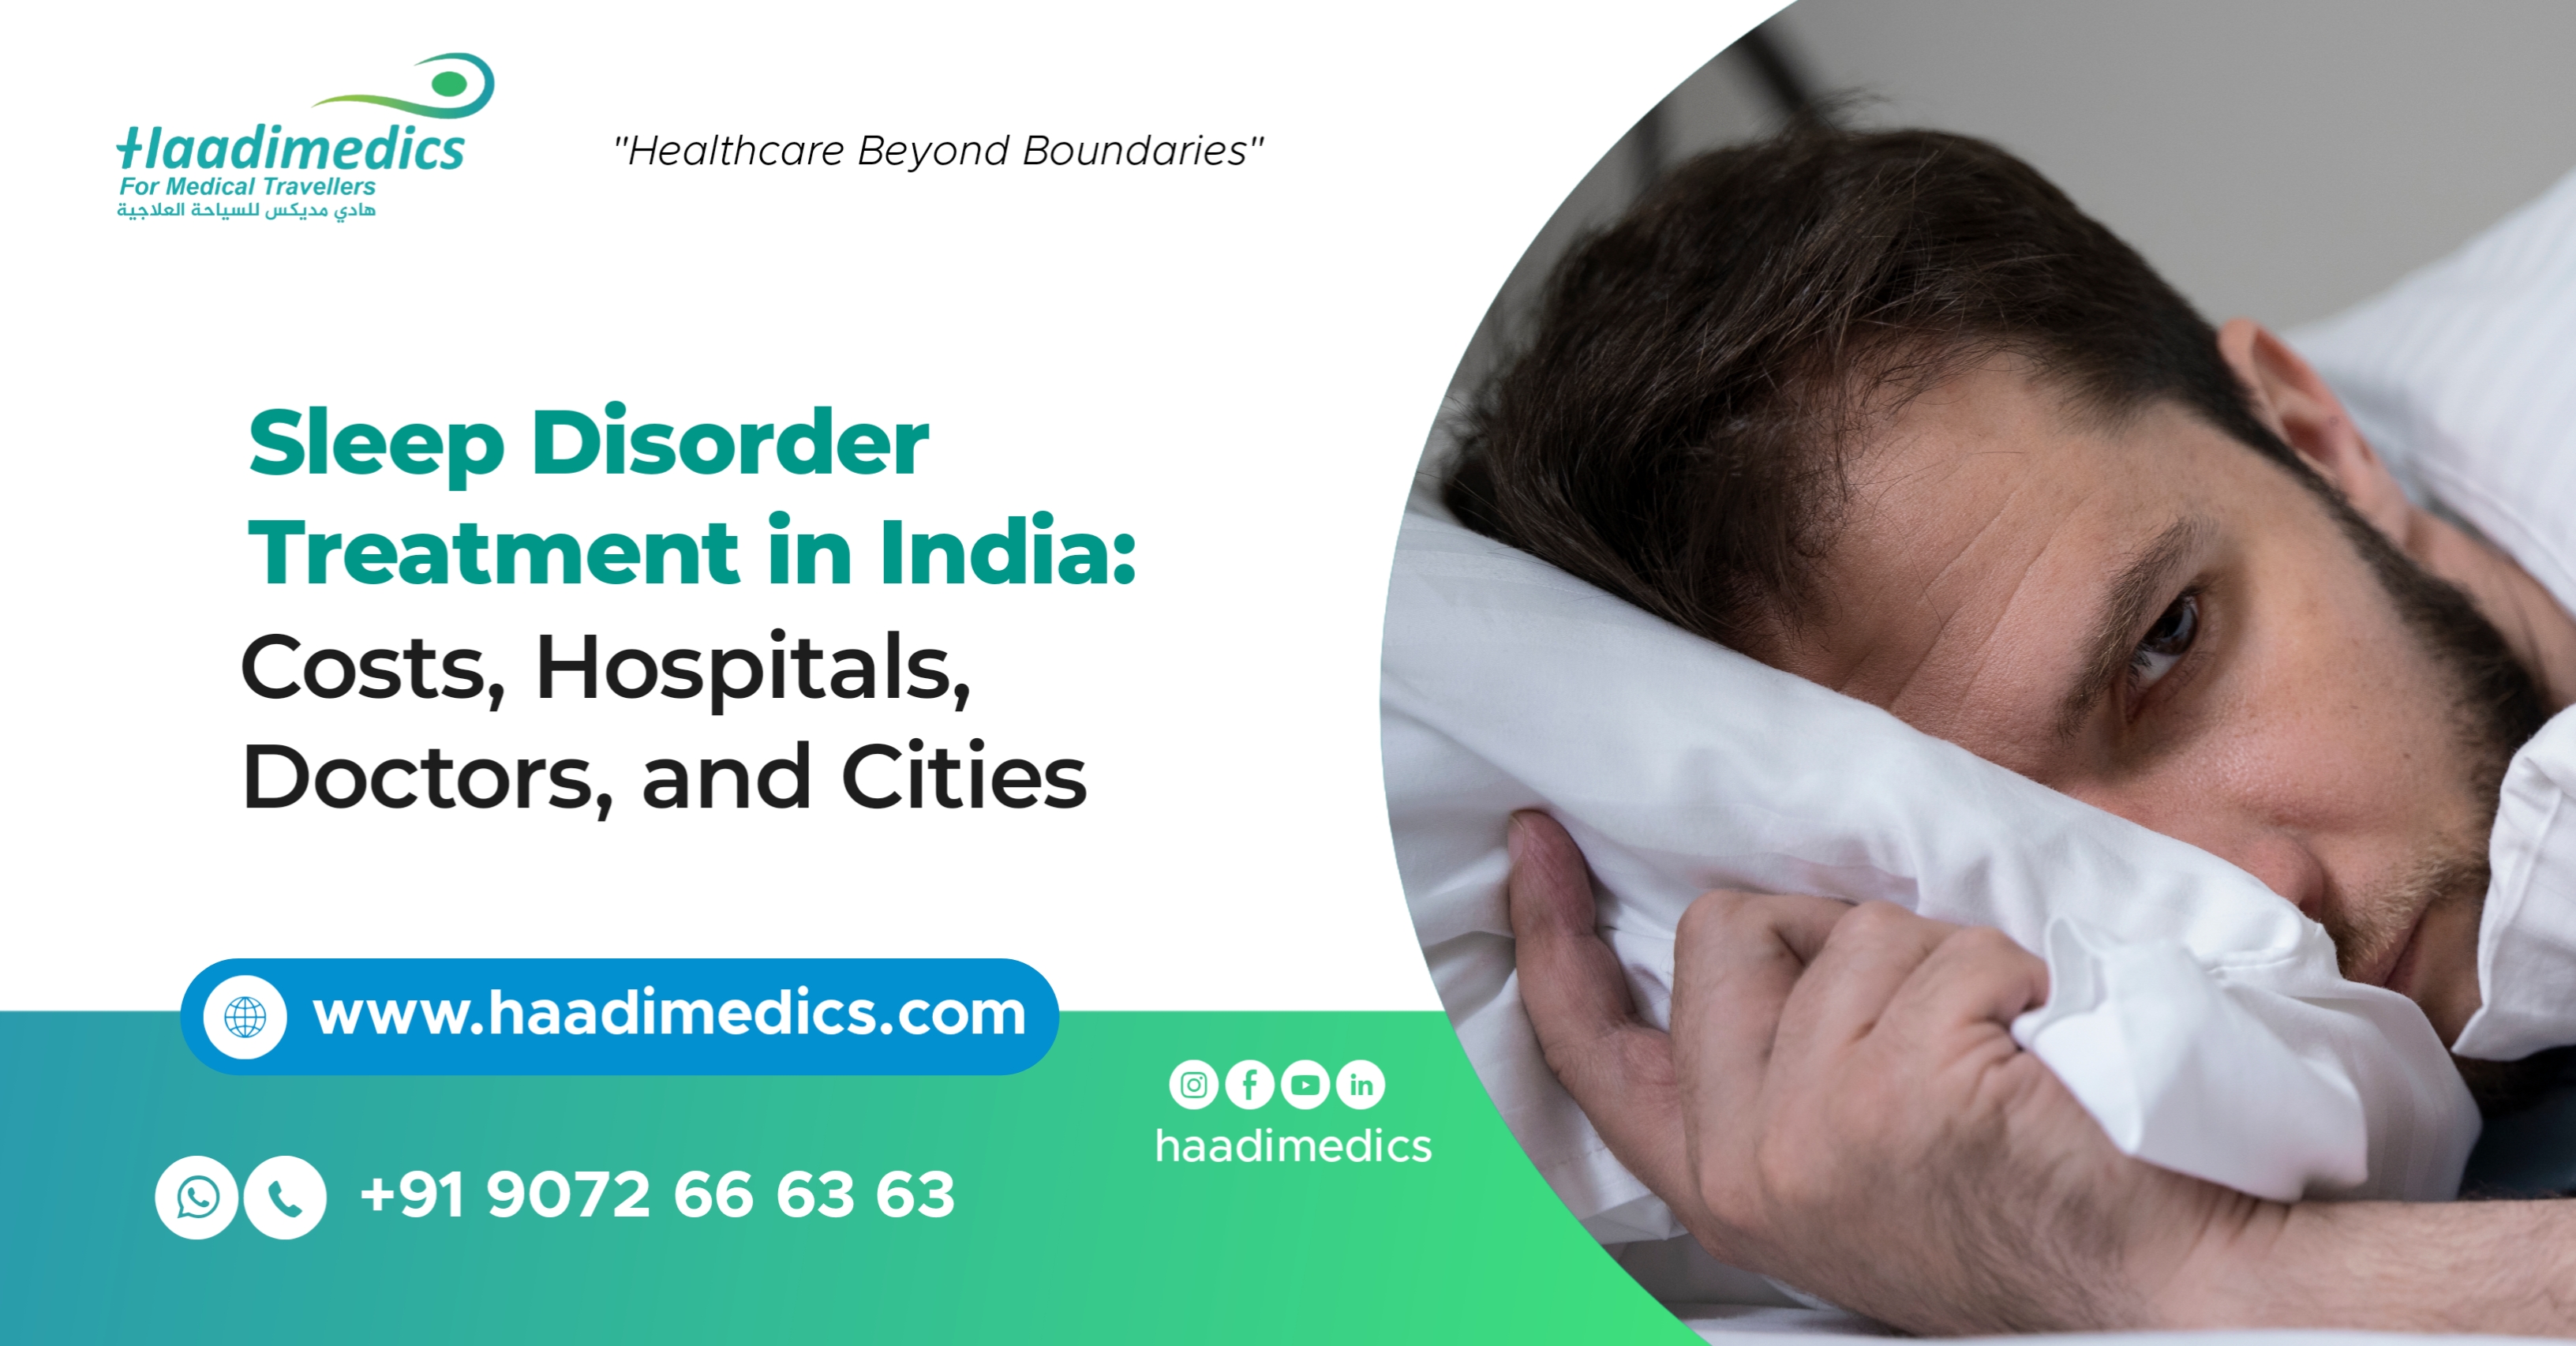 Sleep Disorder Treatment in India: Costs, Hospitals, Doctors, and Cities